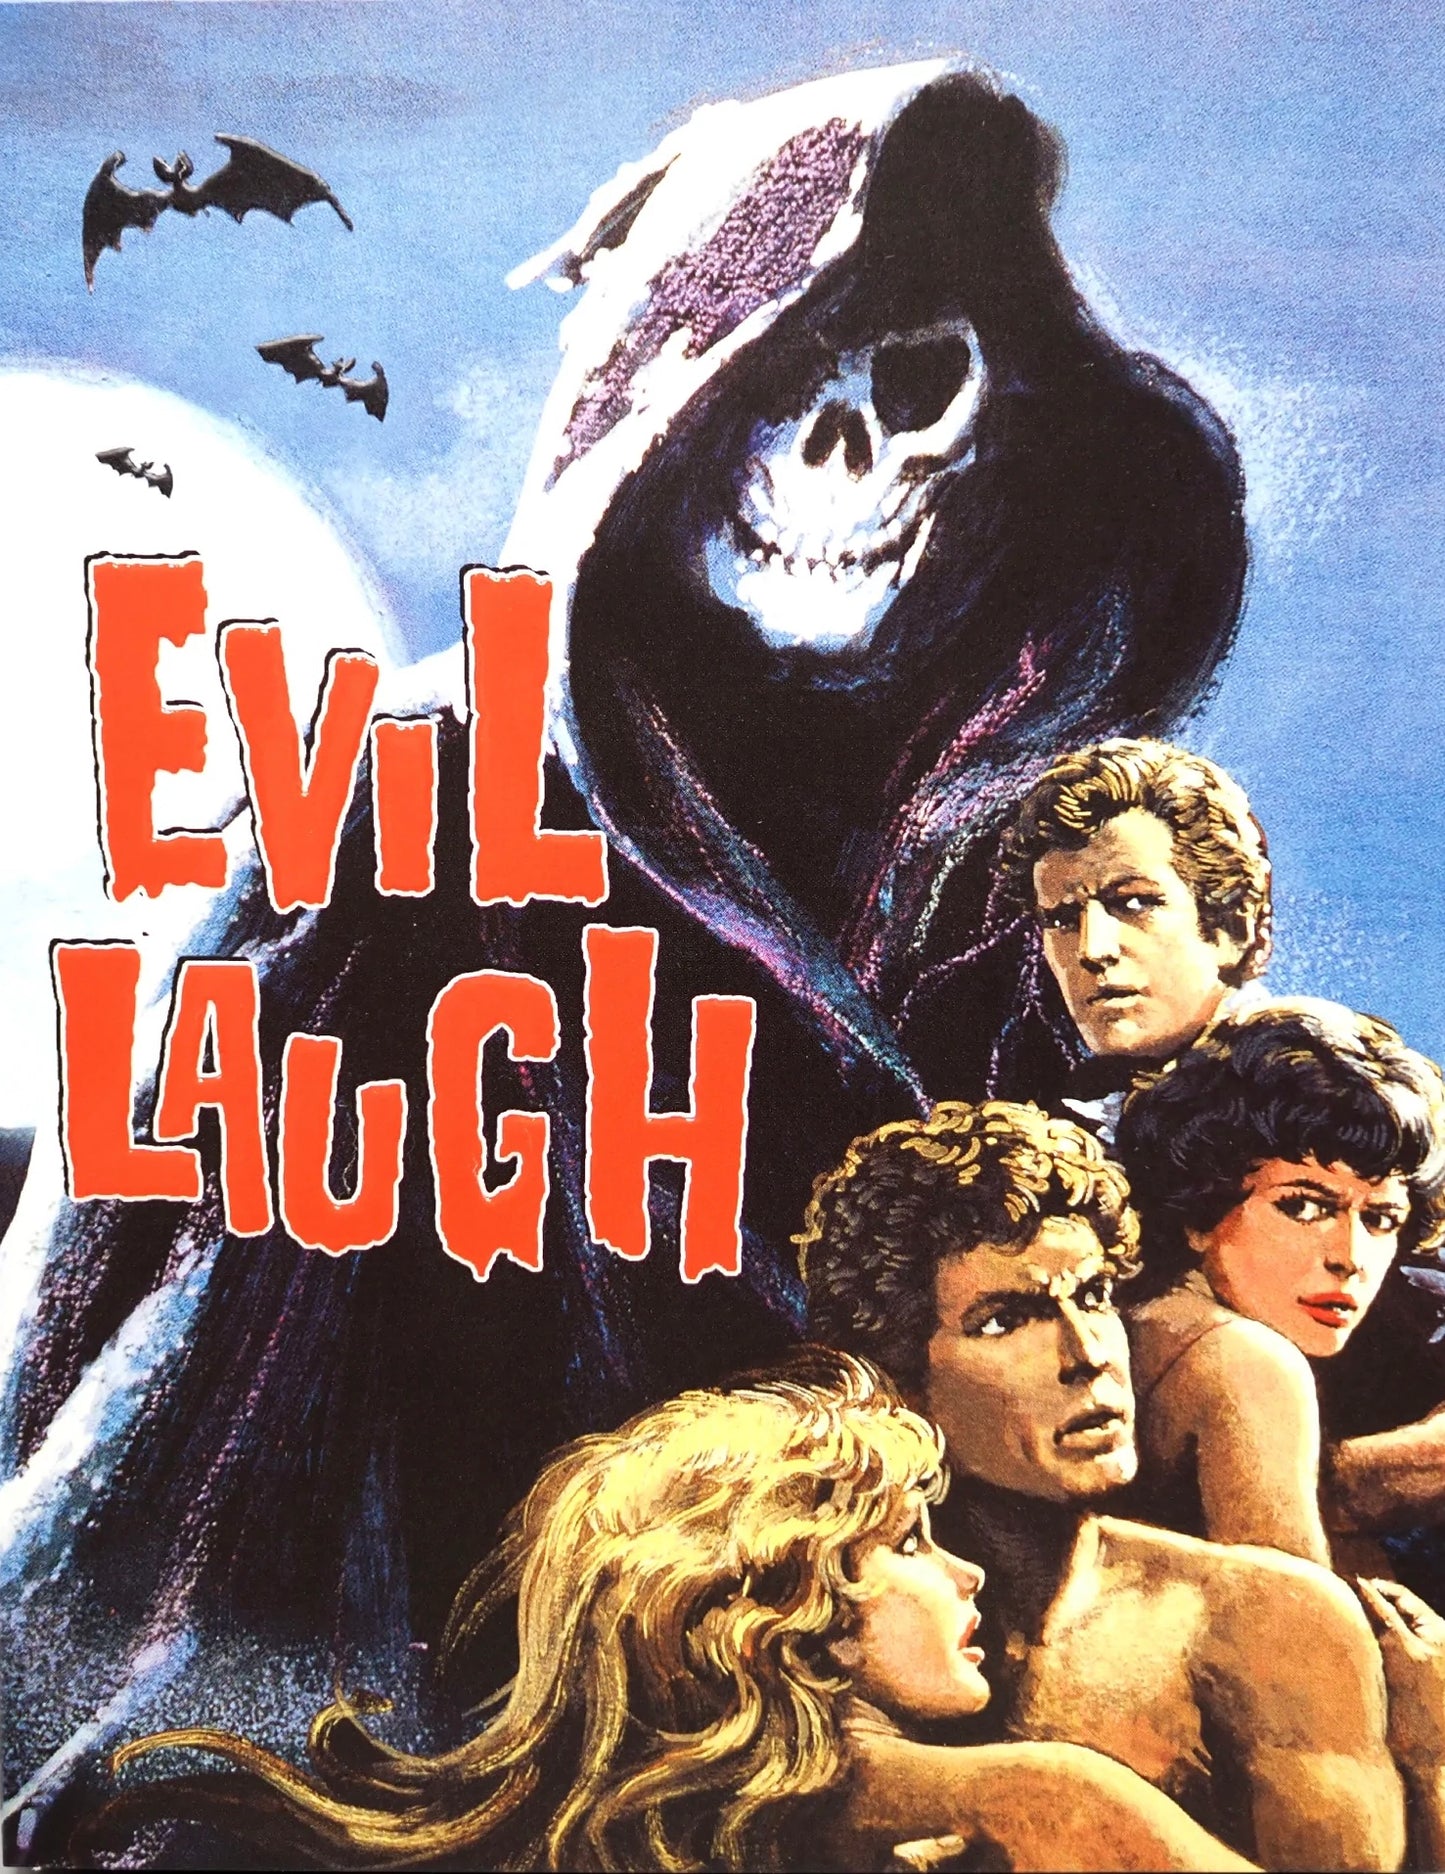 Evil Laugh Limited Edition Vinegar Syndrome Blu-Ray [NEW] [SLIPCOVER]